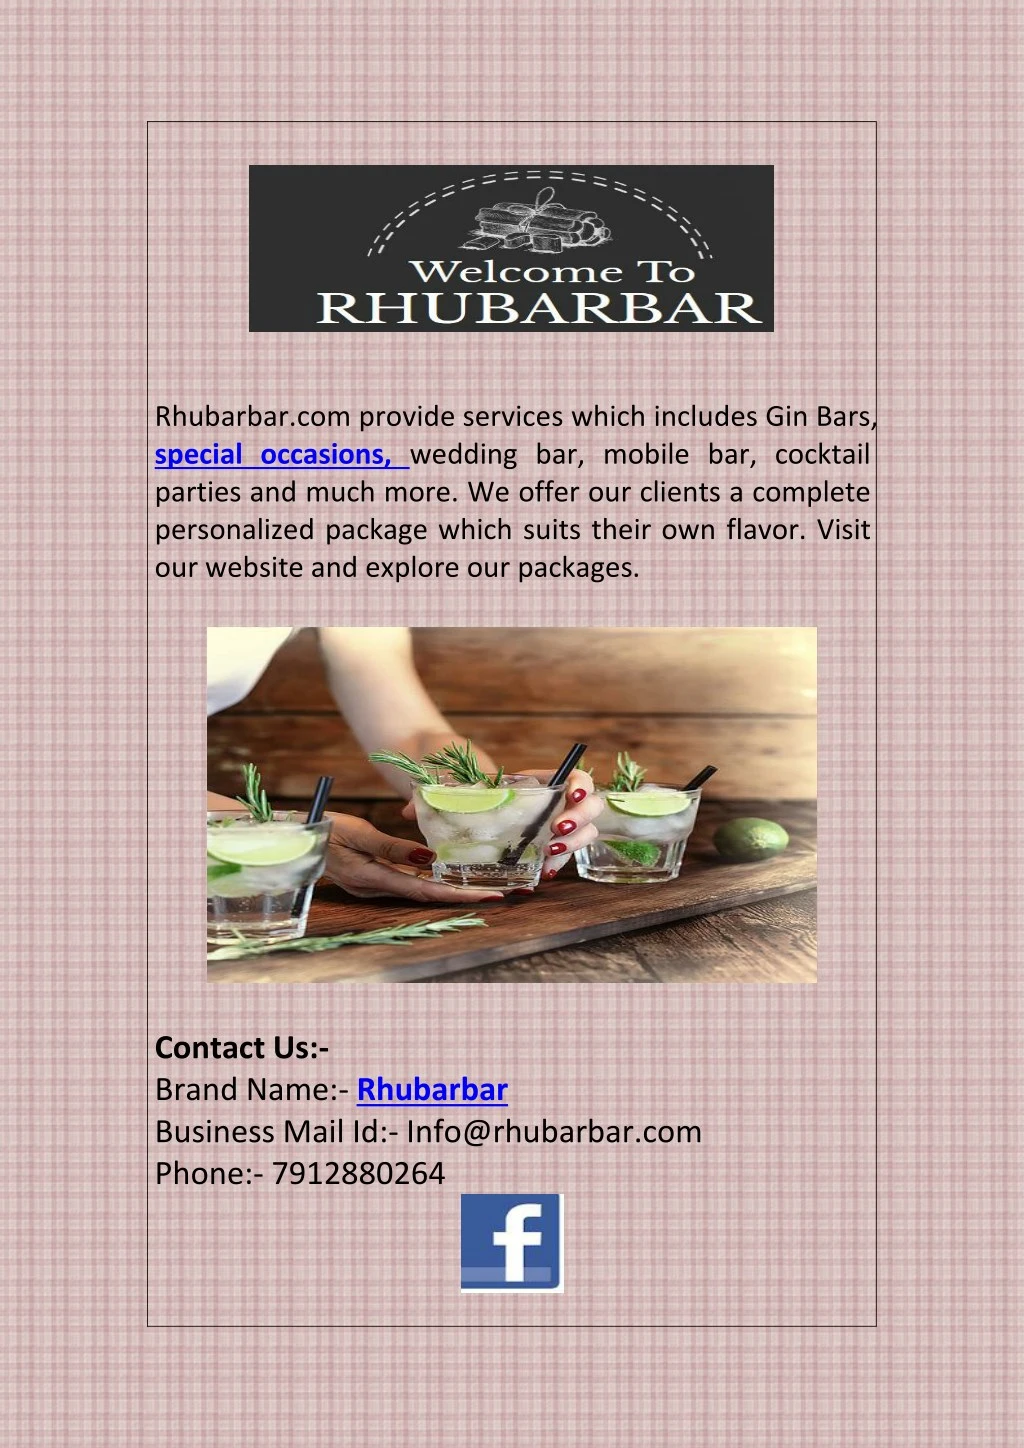 rhubarbar com provide services which includes